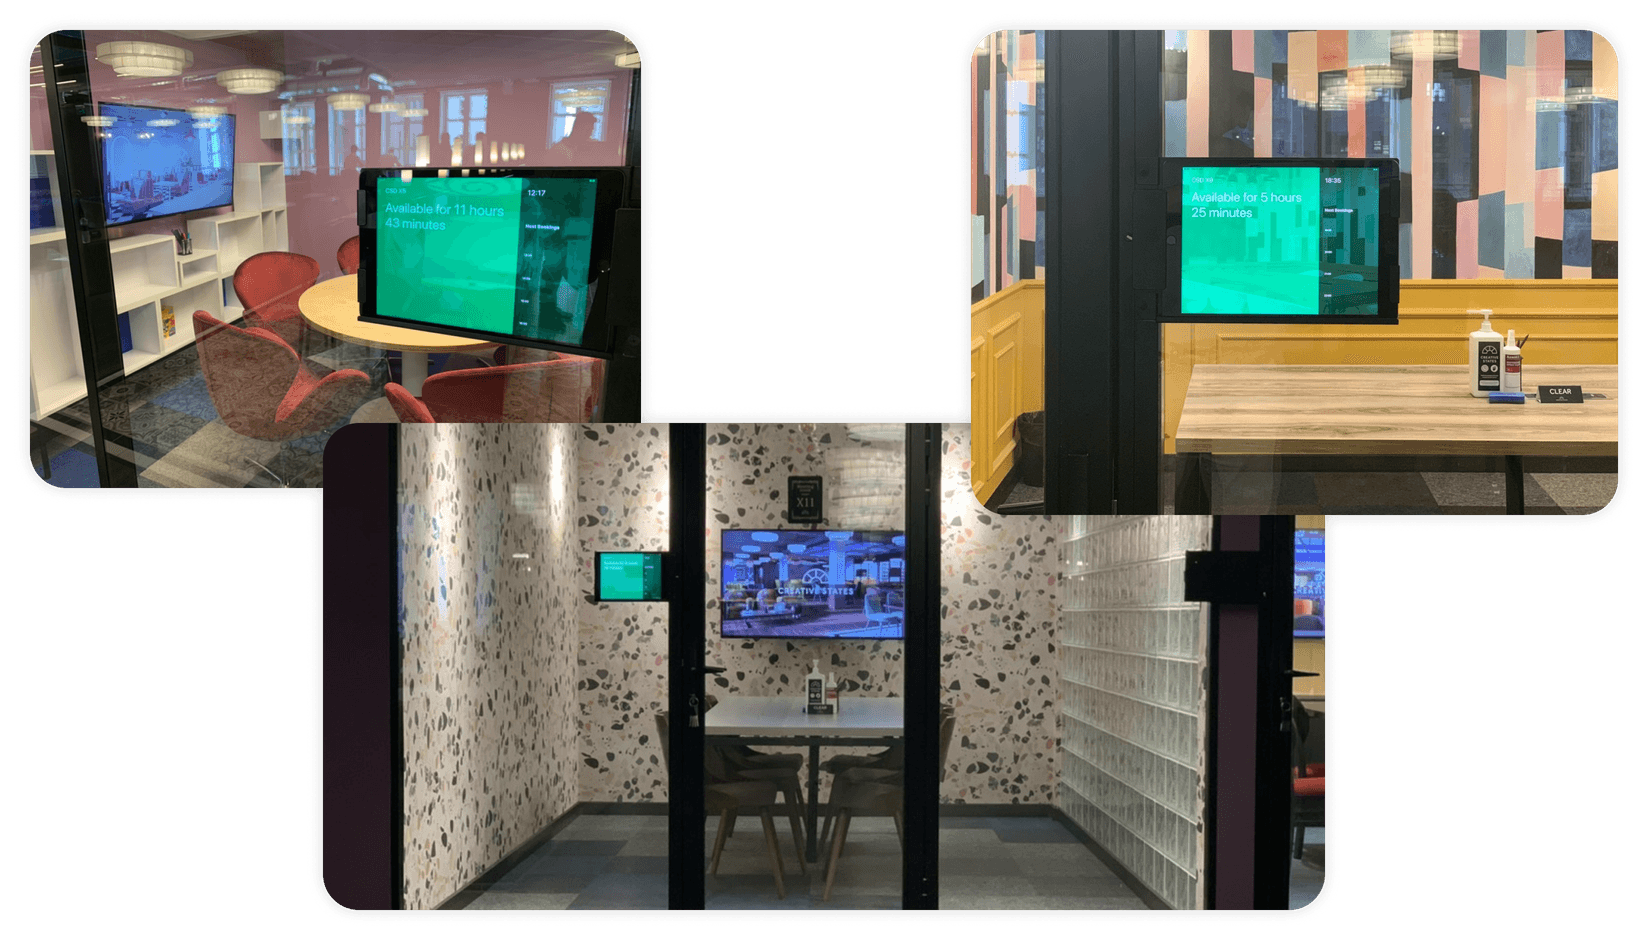 Meeting room display systems in coworking spaces